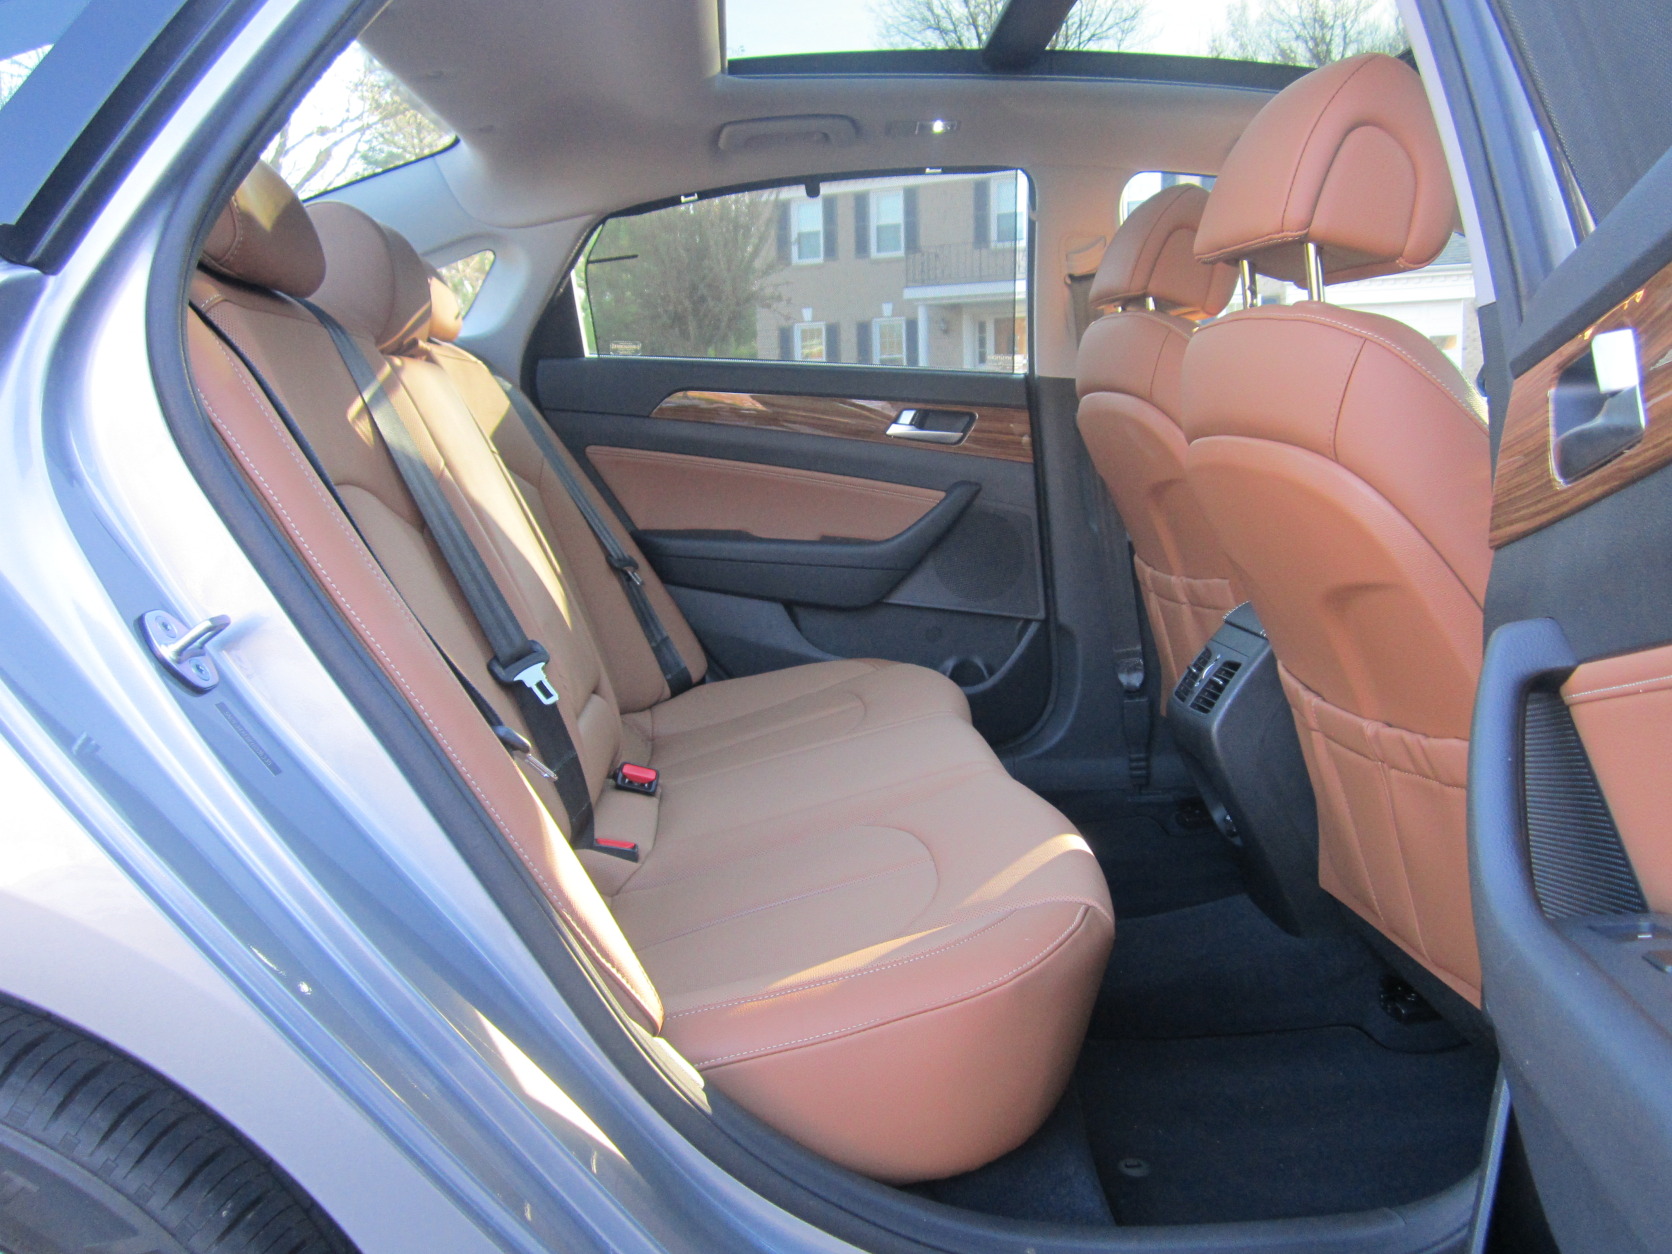 There seems to be more space than in the last Sonata, and plenty of room for the family -- although taller rear-seat passengers will need to watch their heads getting in. (WTOP/Mike Parris)